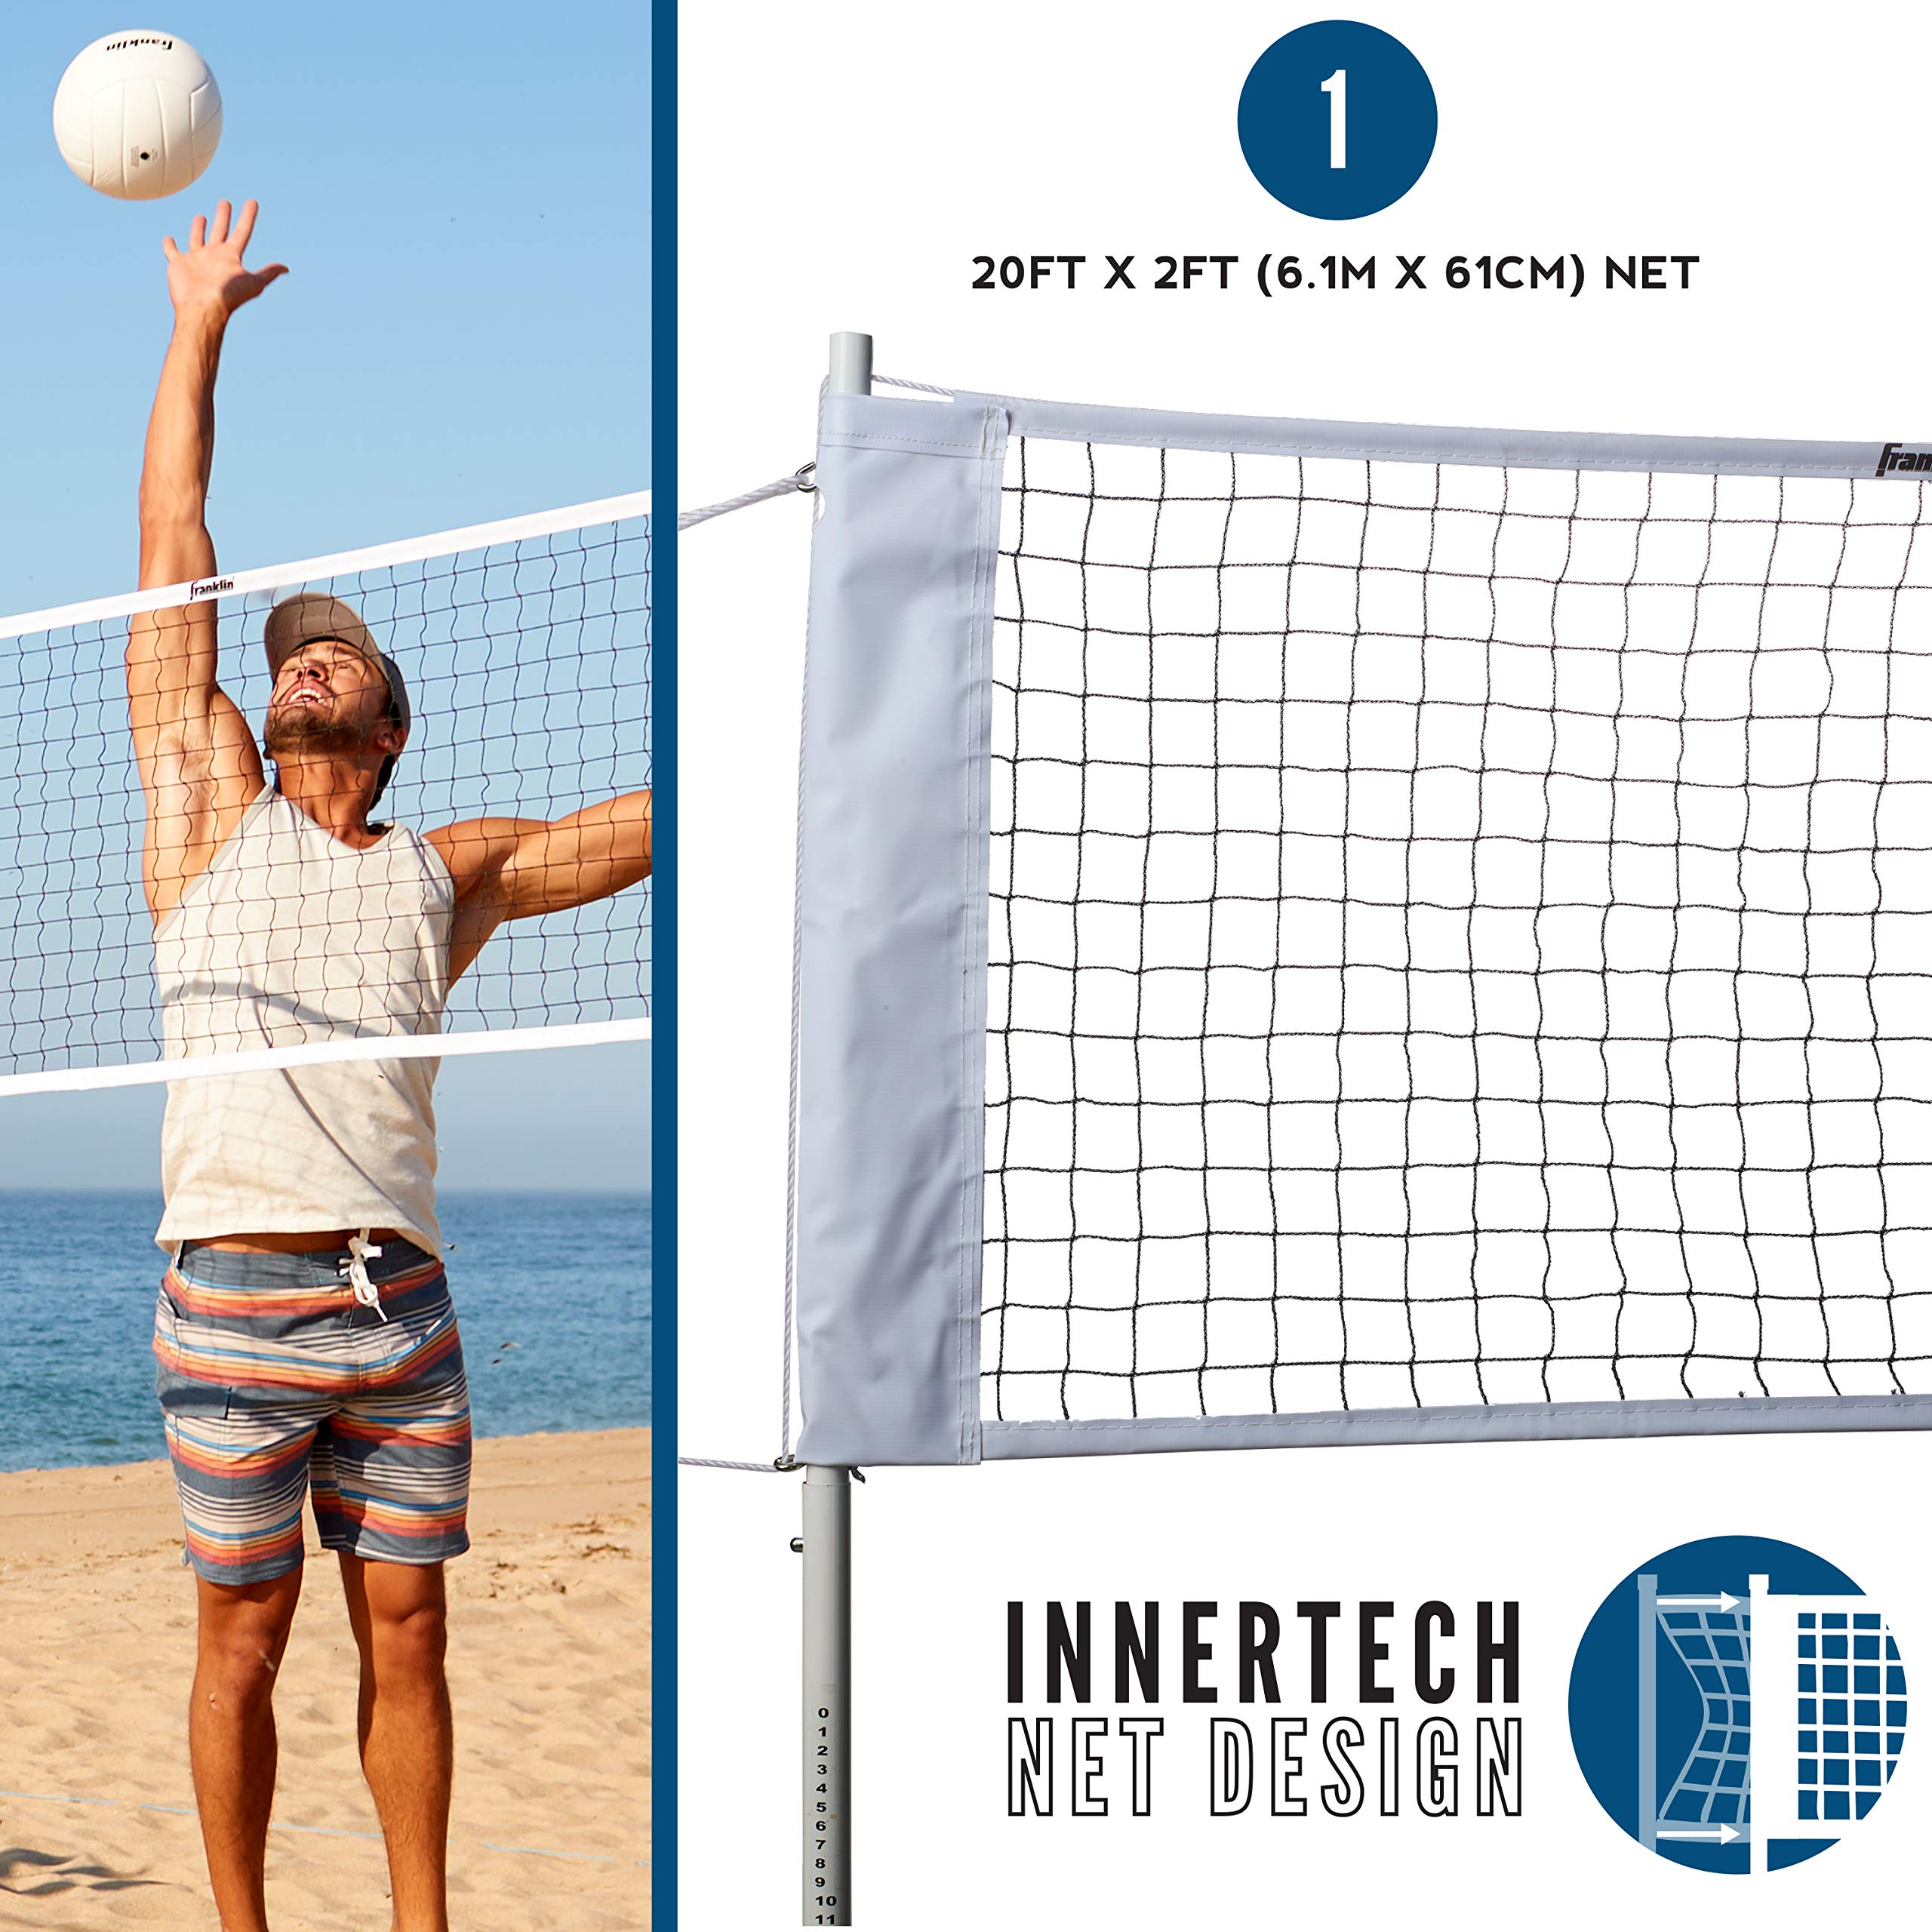 Franklin Sports Volleyball Net Sets - Backyard + Beach Portable Volleyball Set for Kids + Adults - Volleyballs + Nets with Poles + Equipment Included - Carry Bag for Storage + Transport